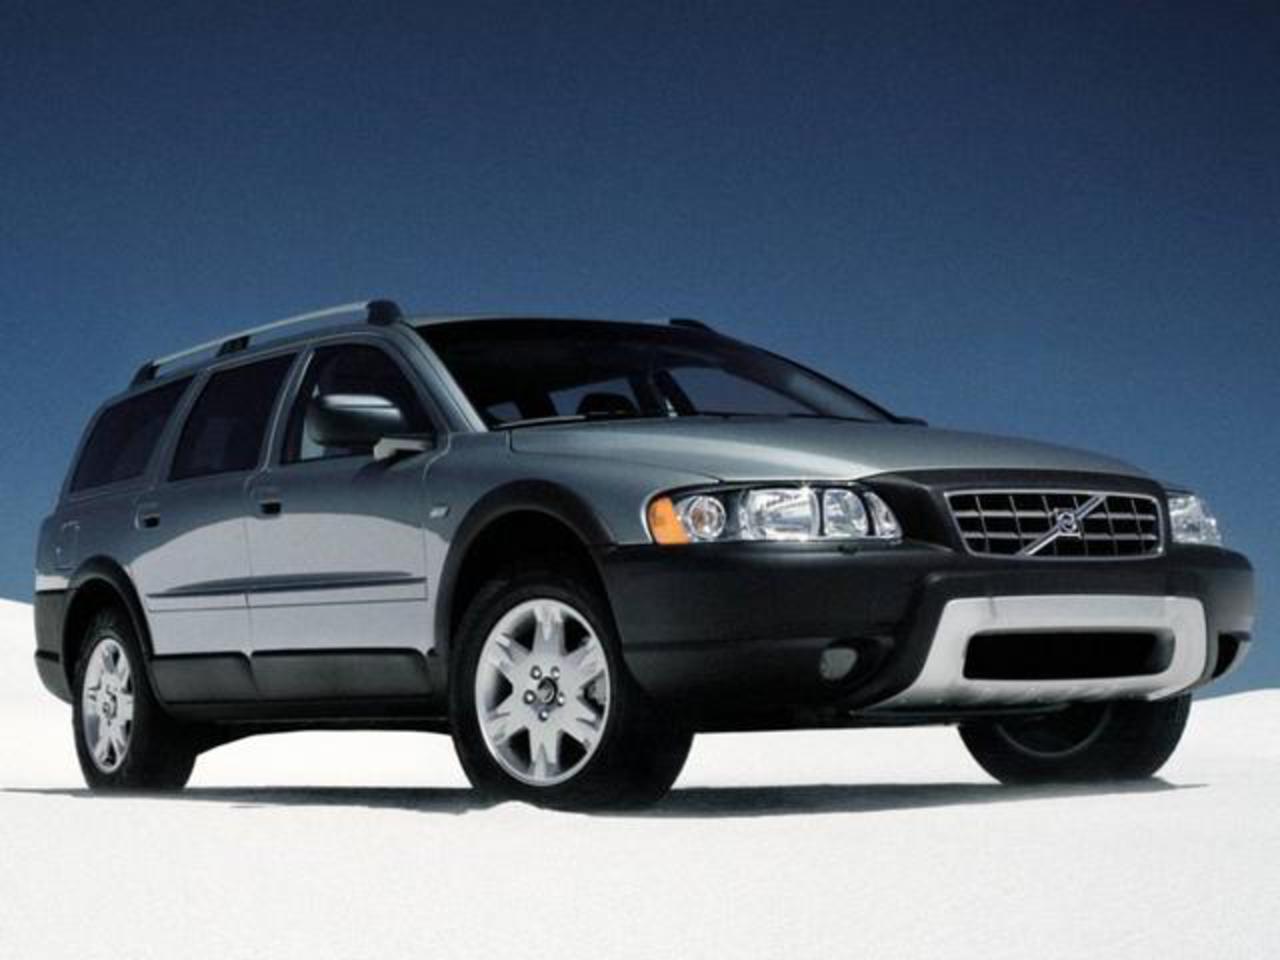 Volvo XC70 D5 AWD. View Download Wallpaper. 640x480. Comments